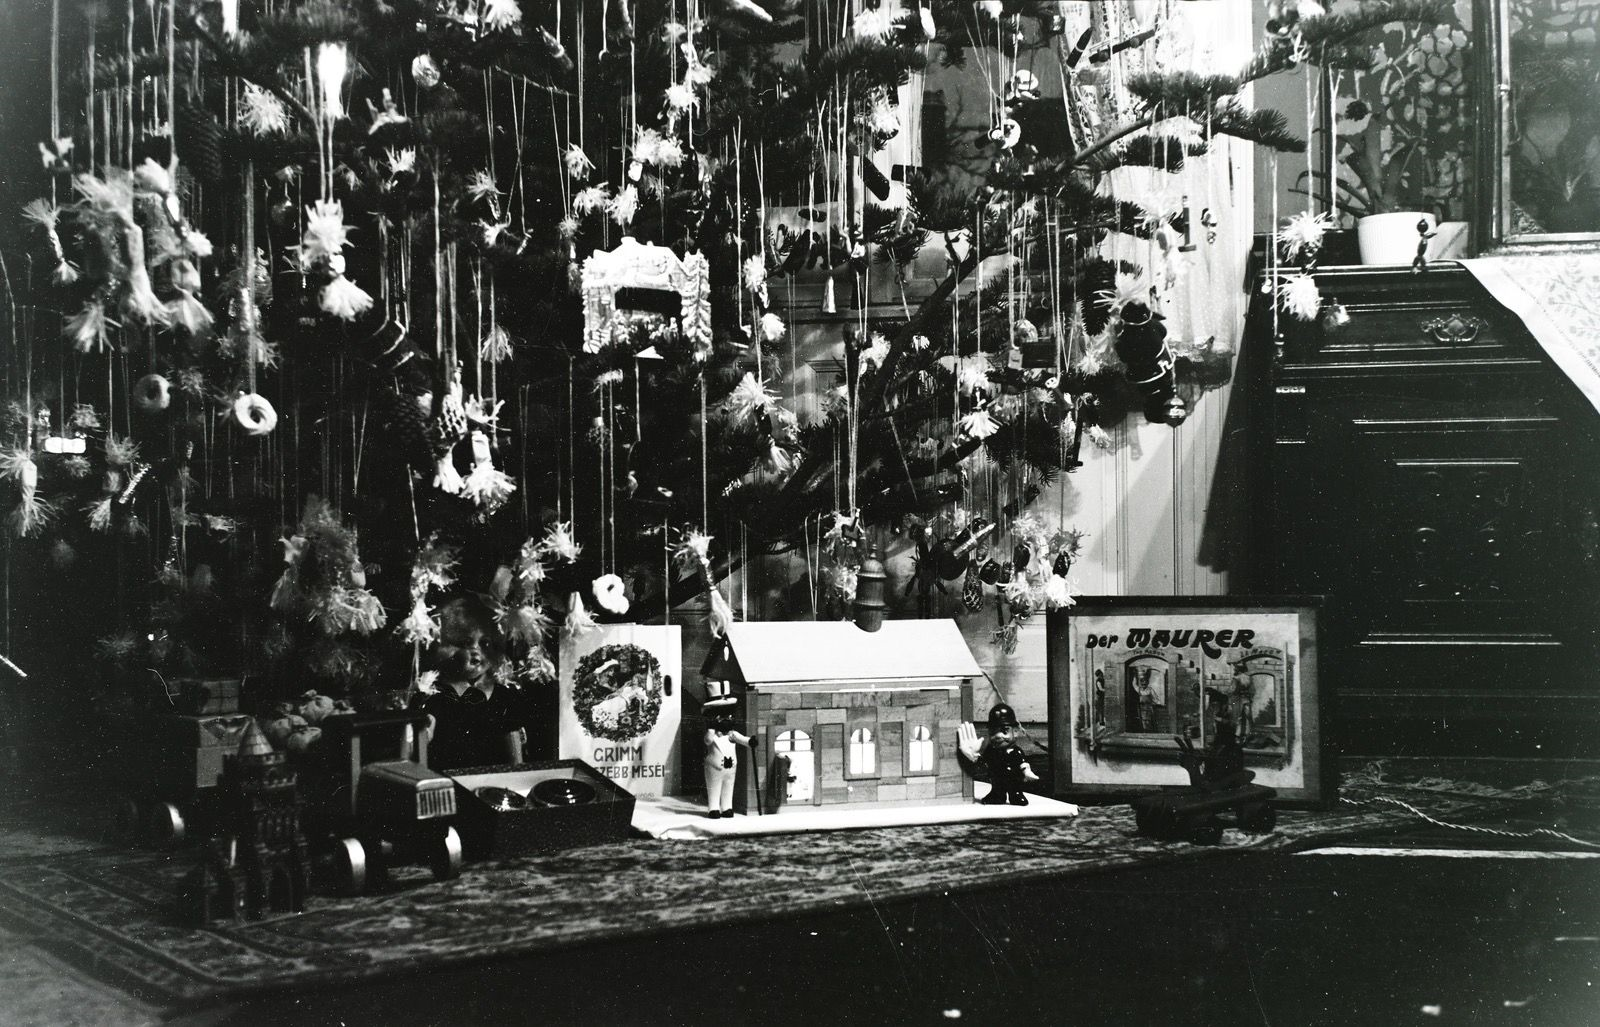 The way we used to decorate Christmas trees | Our Fortepan selection